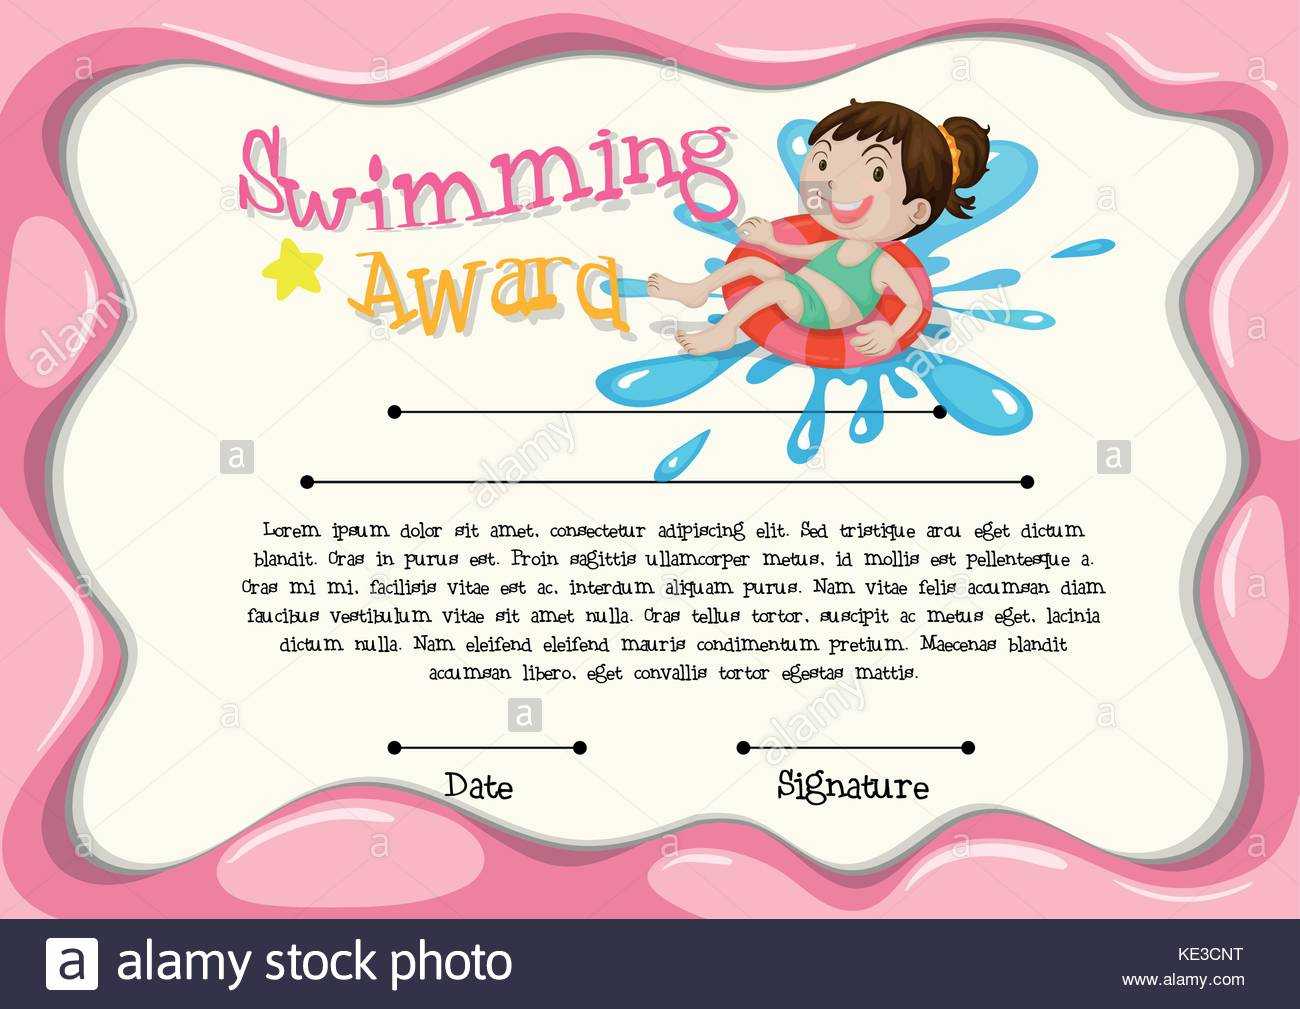 Certificate Template With Girl Swimming Illustration Stock For Swimming Award Certificate Template